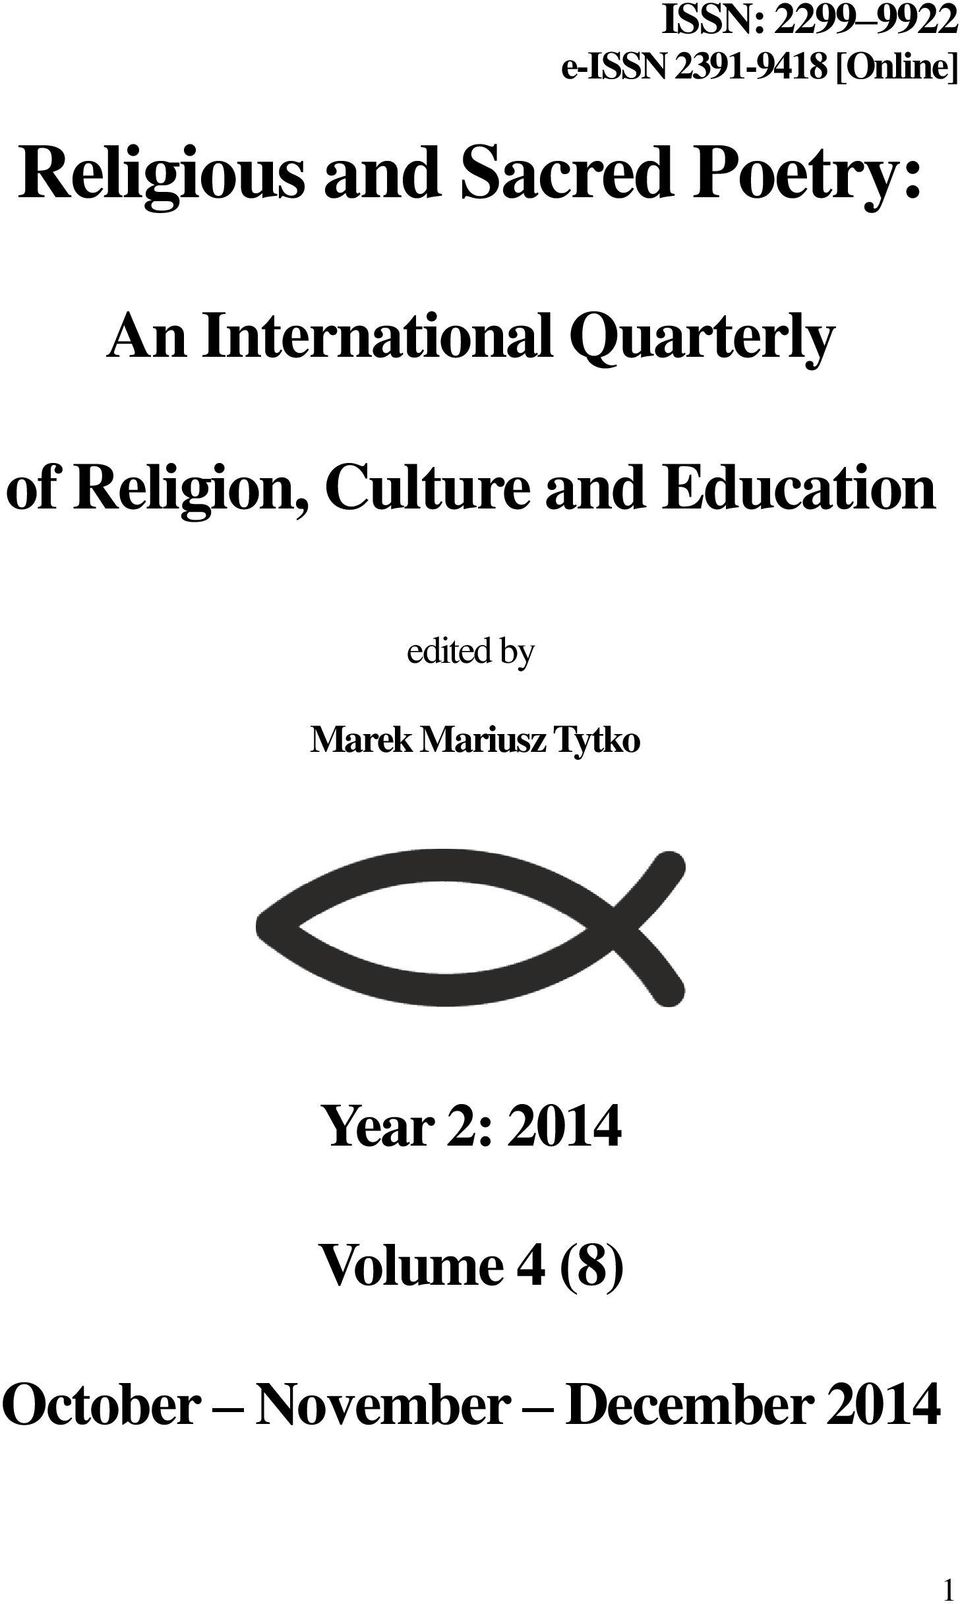 Culture and Education edited by Marek Mariusz Tytko